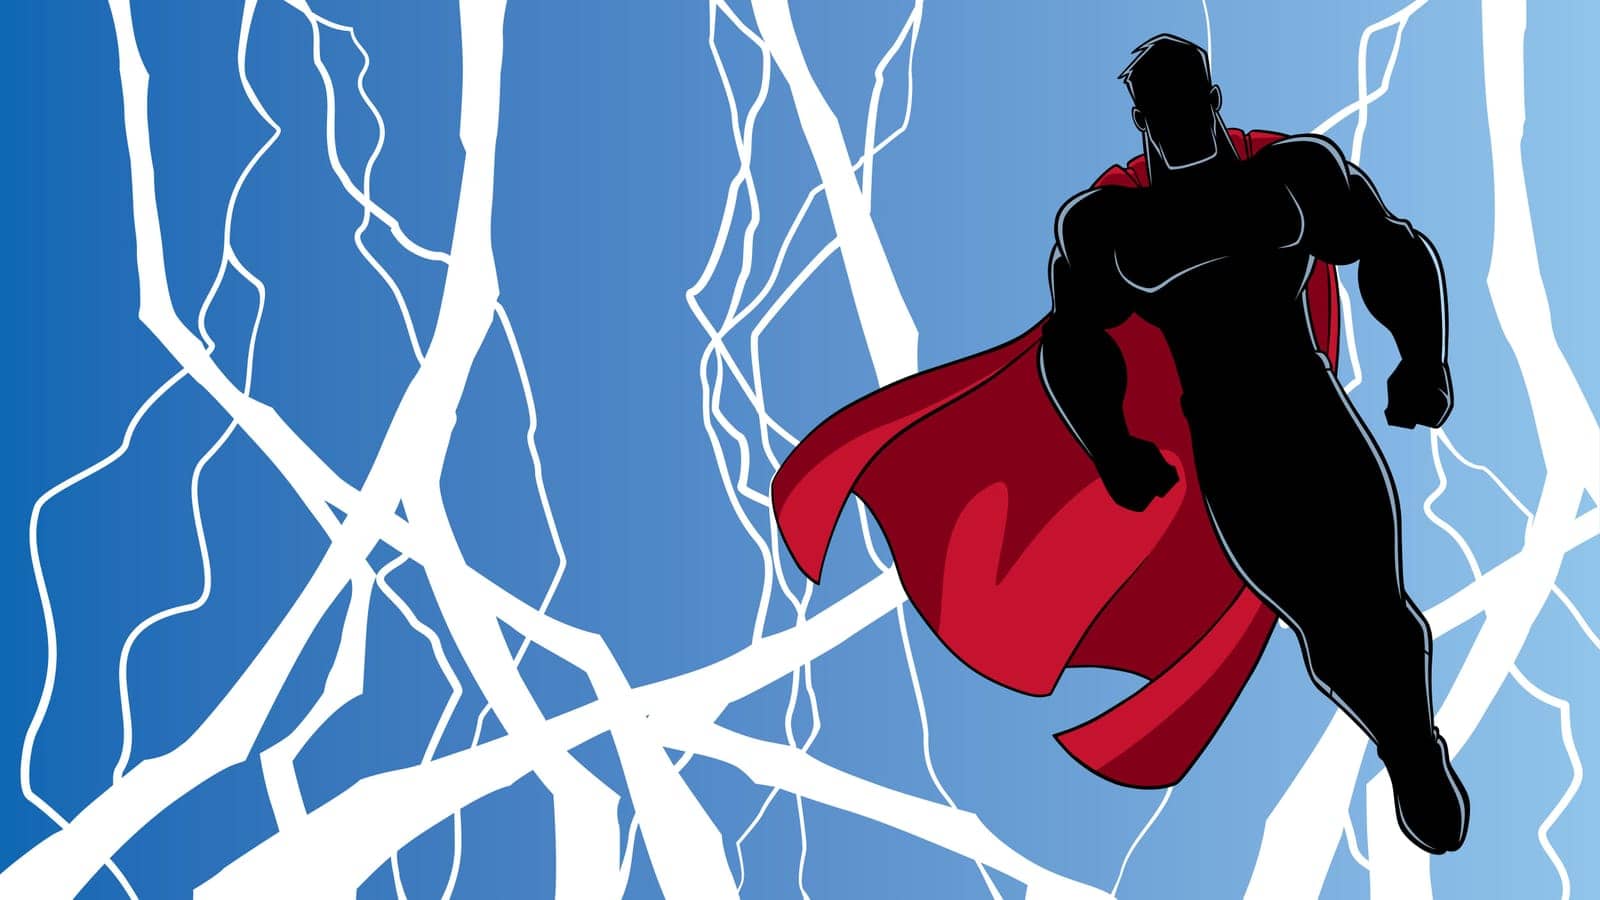 Full length silhouette illustration of powerful superhero looking down while soaring in the sky during a thunderstorm.